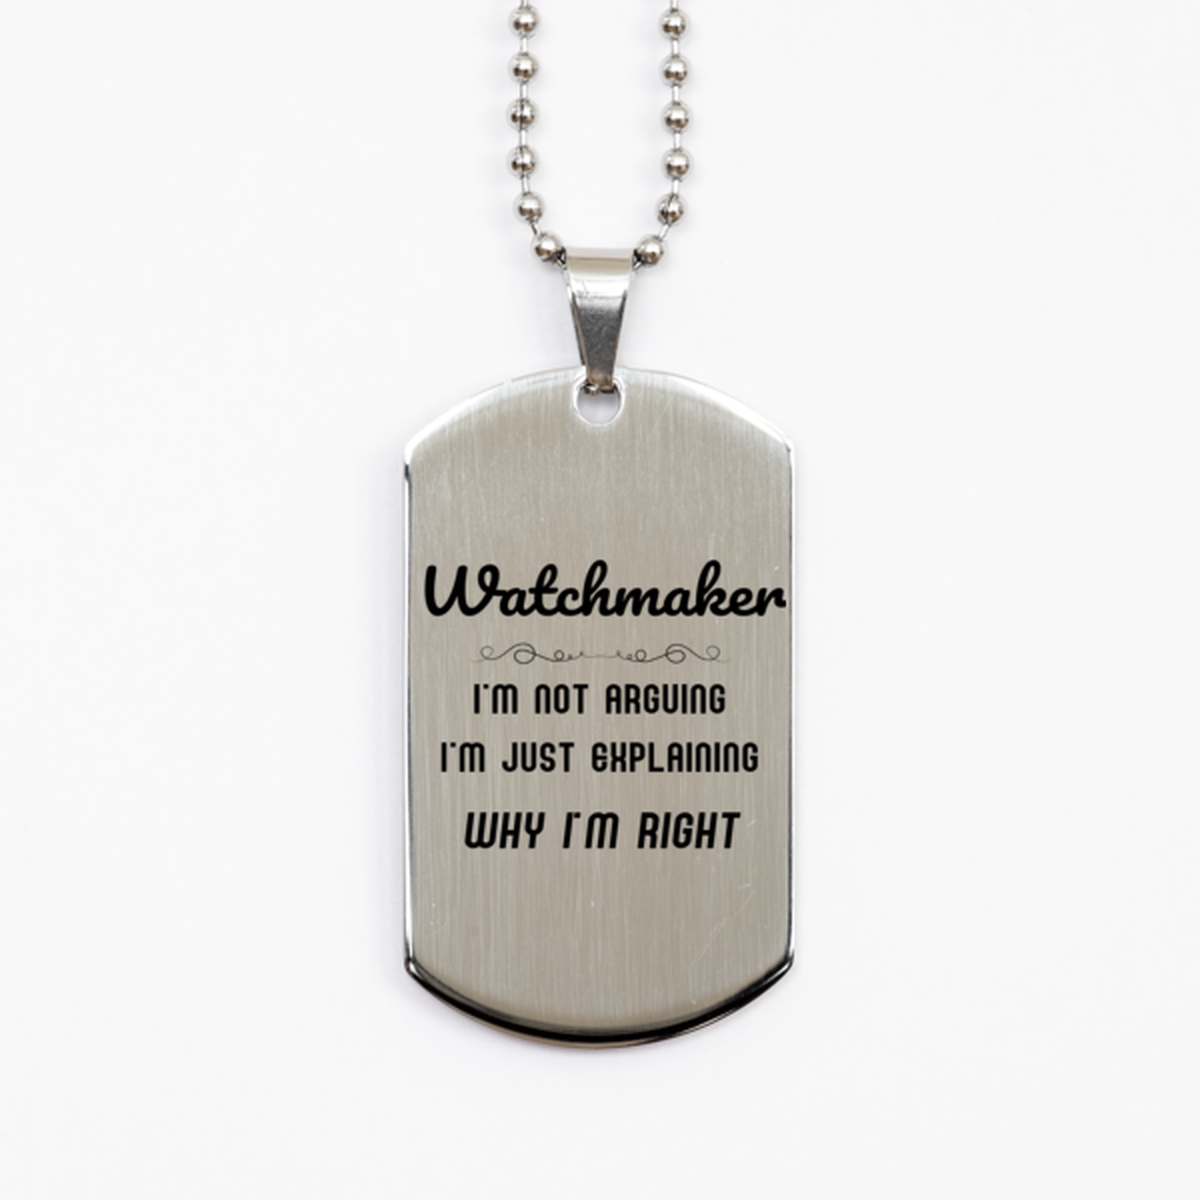 Watchmaker I'm not Arguing. I'm Just Explaining Why I'm RIGHT Silver Dog Tag, Funny Saying Quote Watchmaker Gifts For Watchmaker Graduation Birthday Christmas Gifts for Men Women Coworker